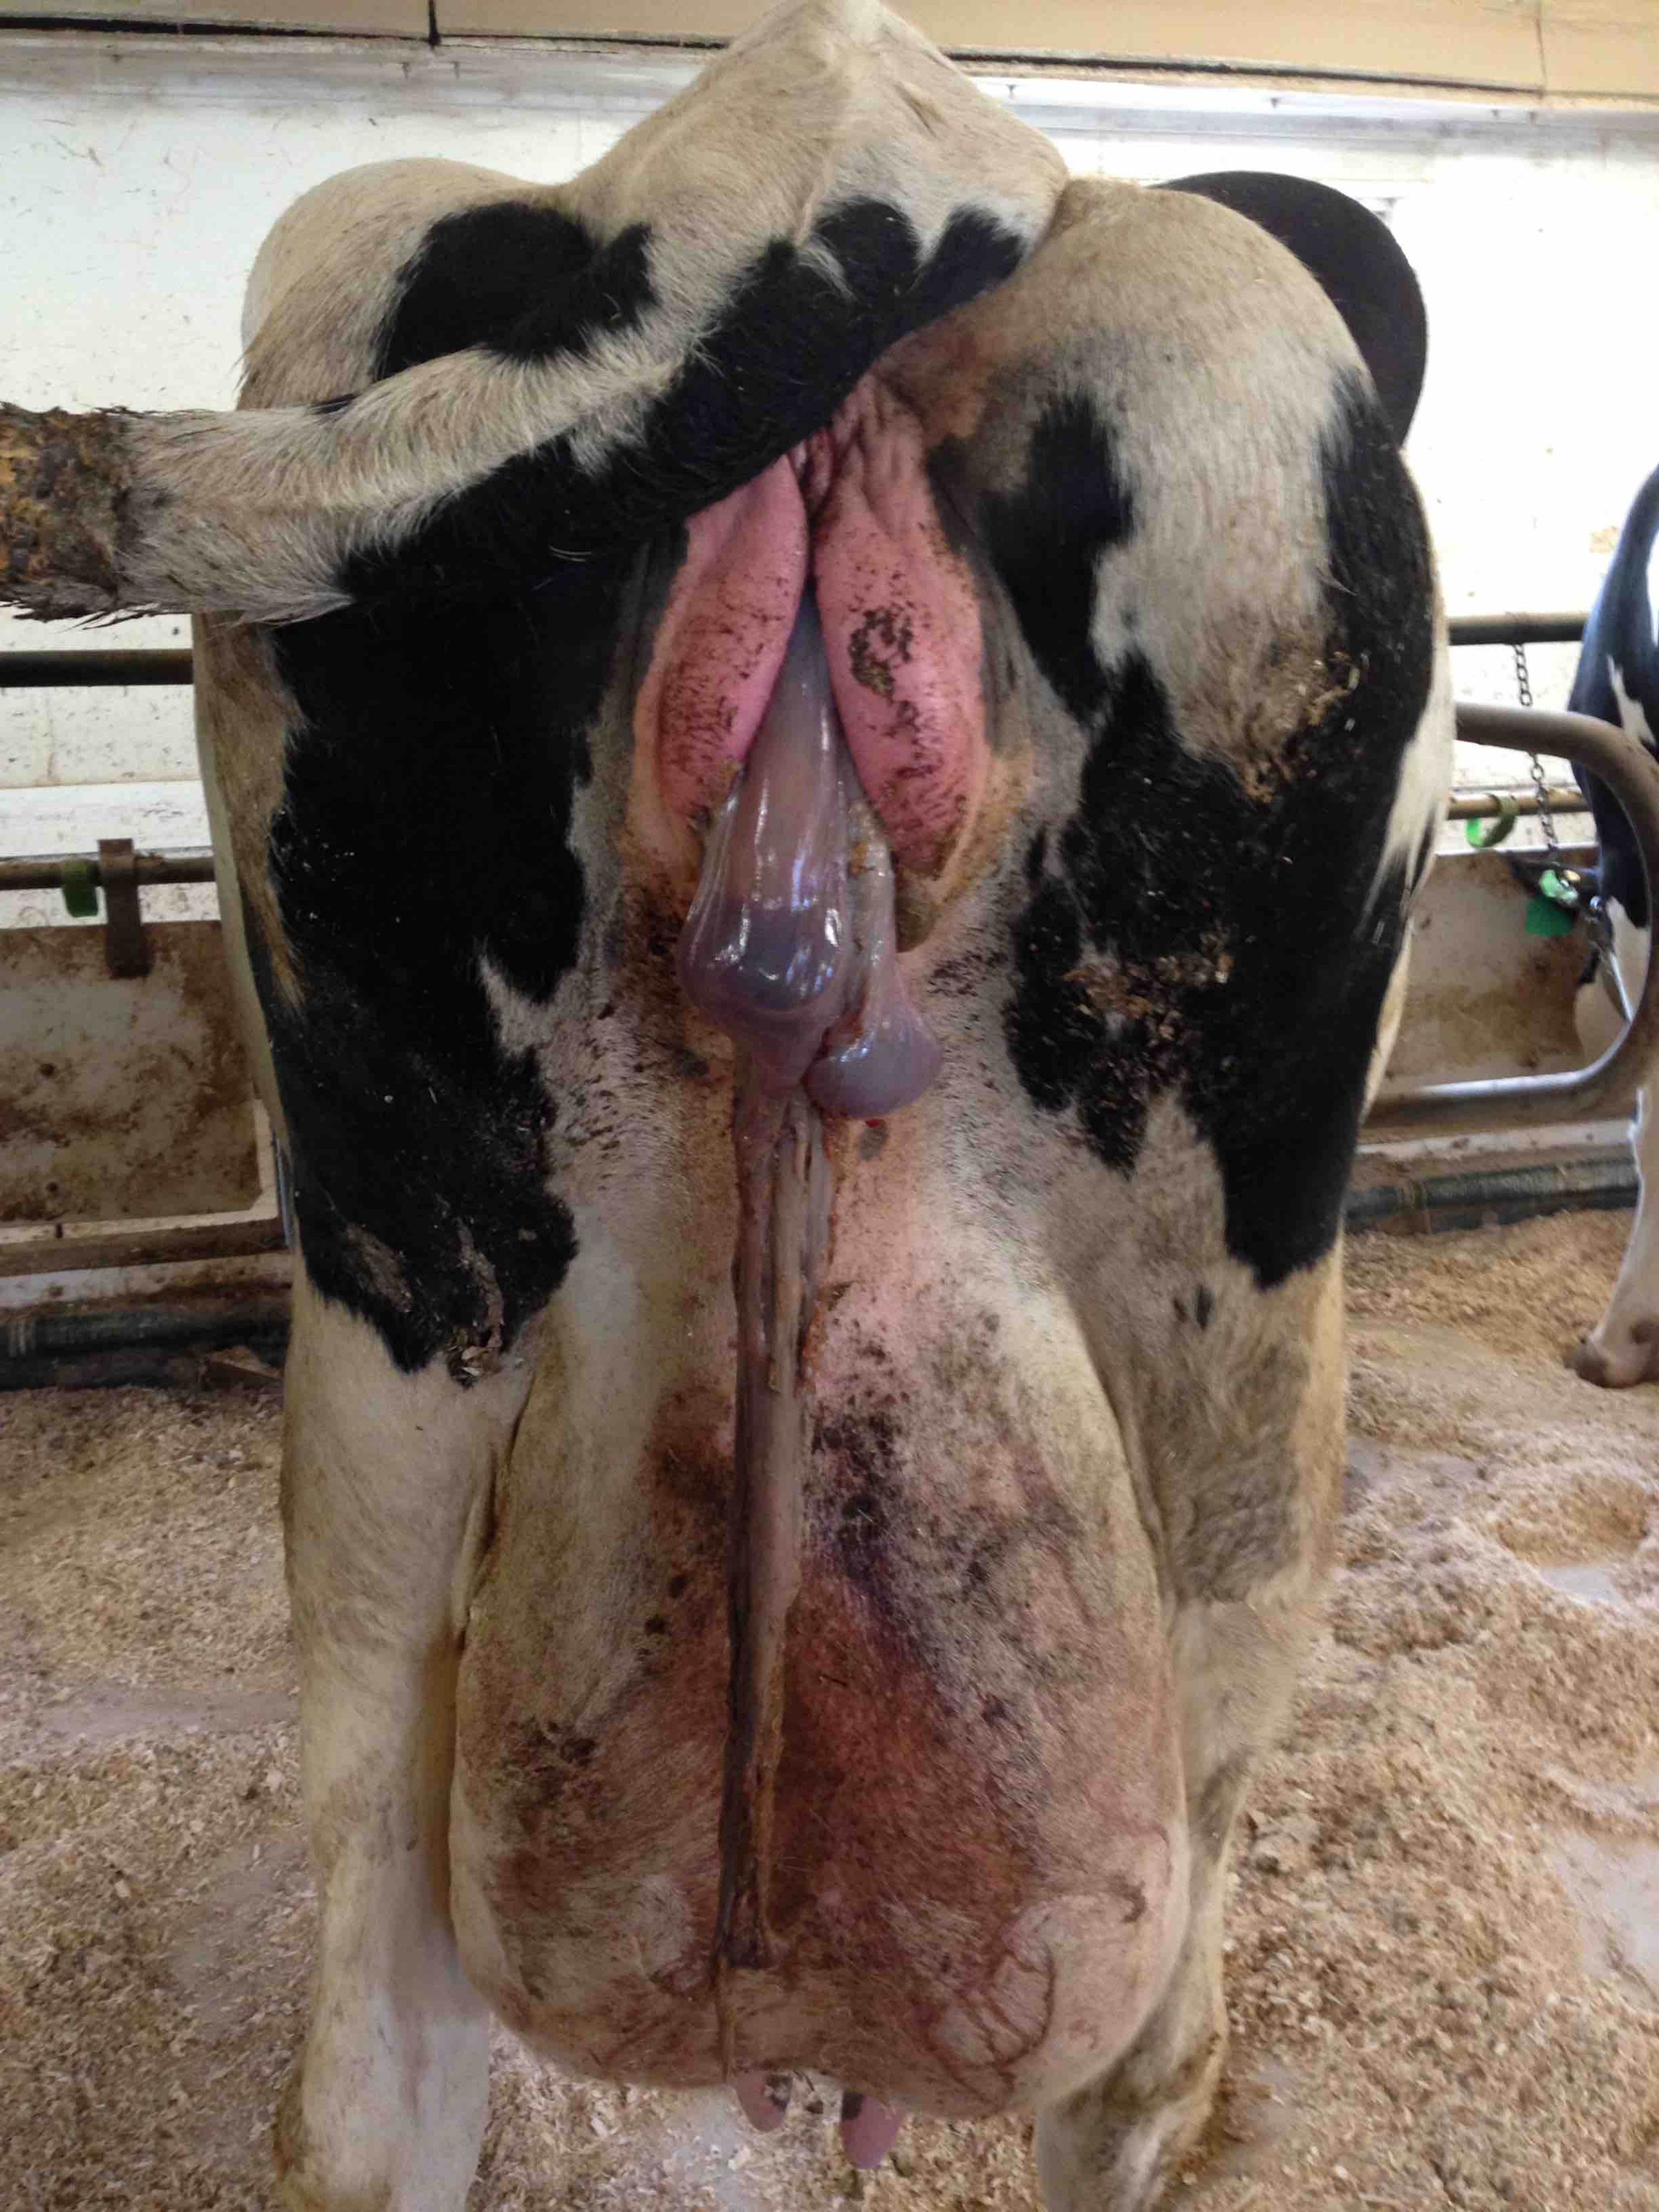 Retained placenta, cow